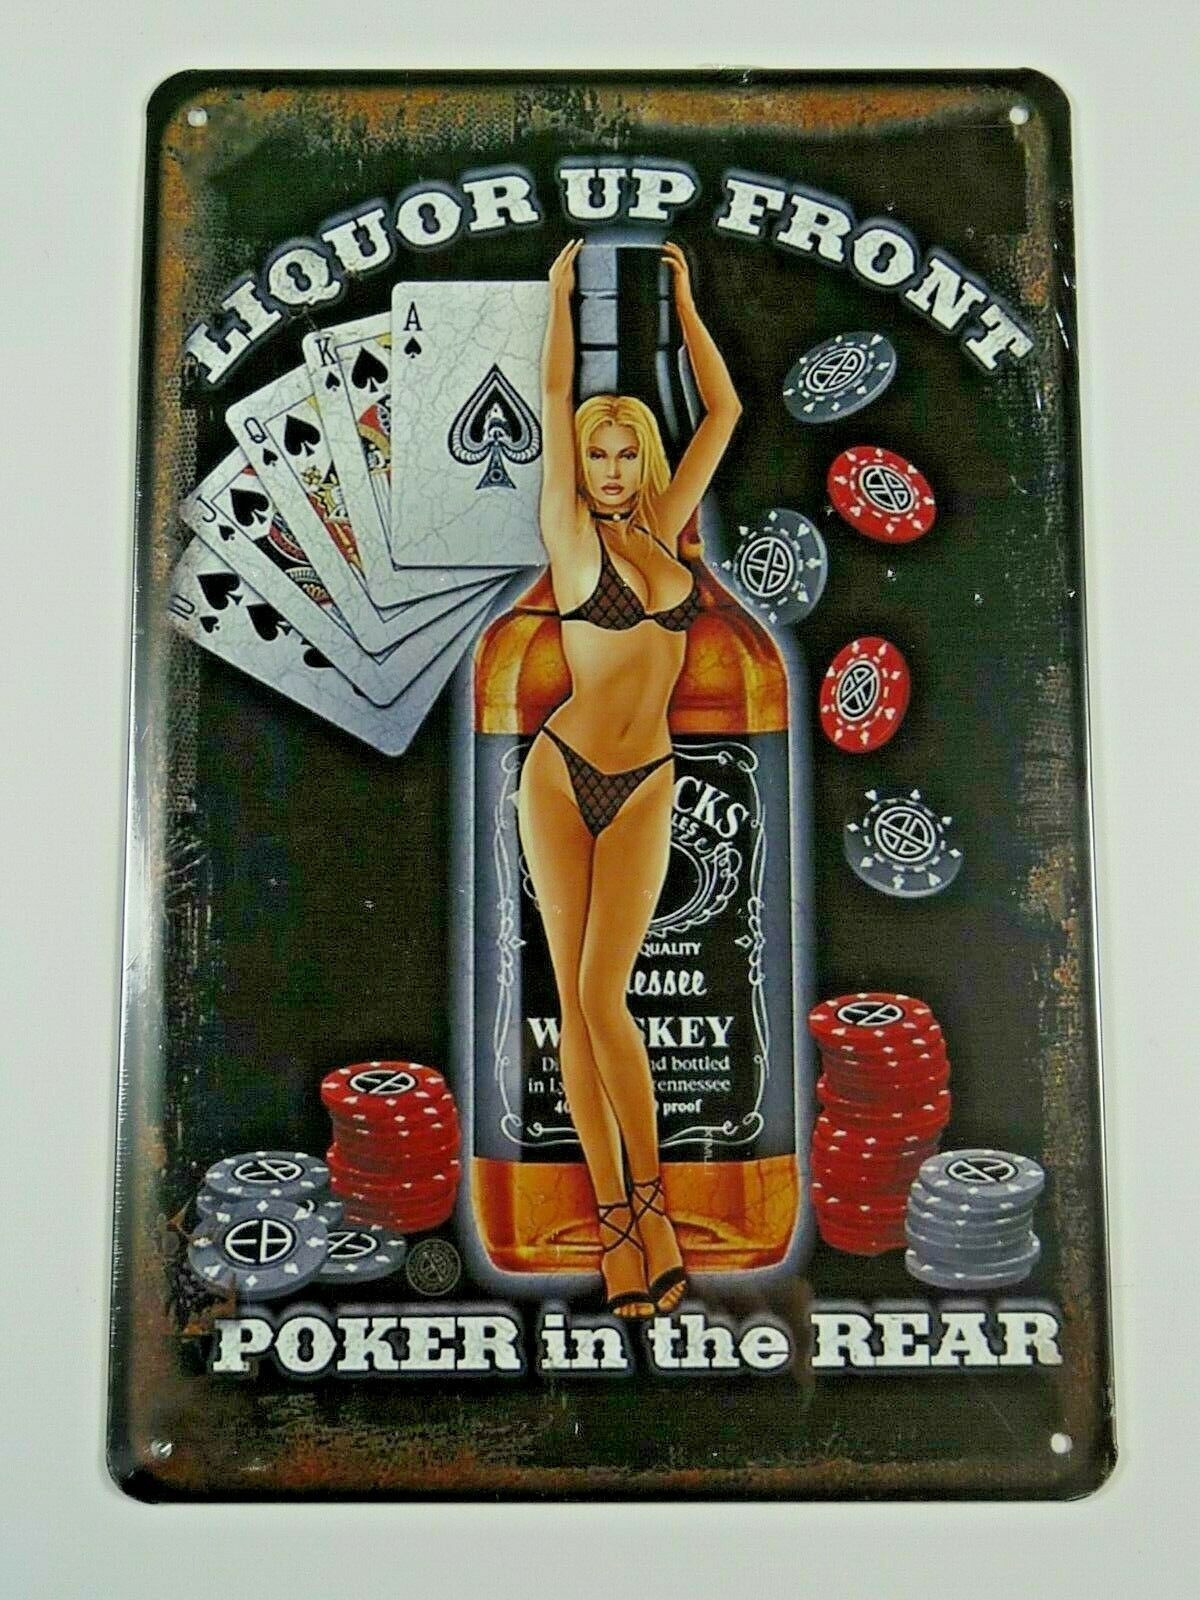 PB59 PLAQUES TOLEE vintage 20 X 30 cm: Pin'up Liquor Up Front Poker in the Rear